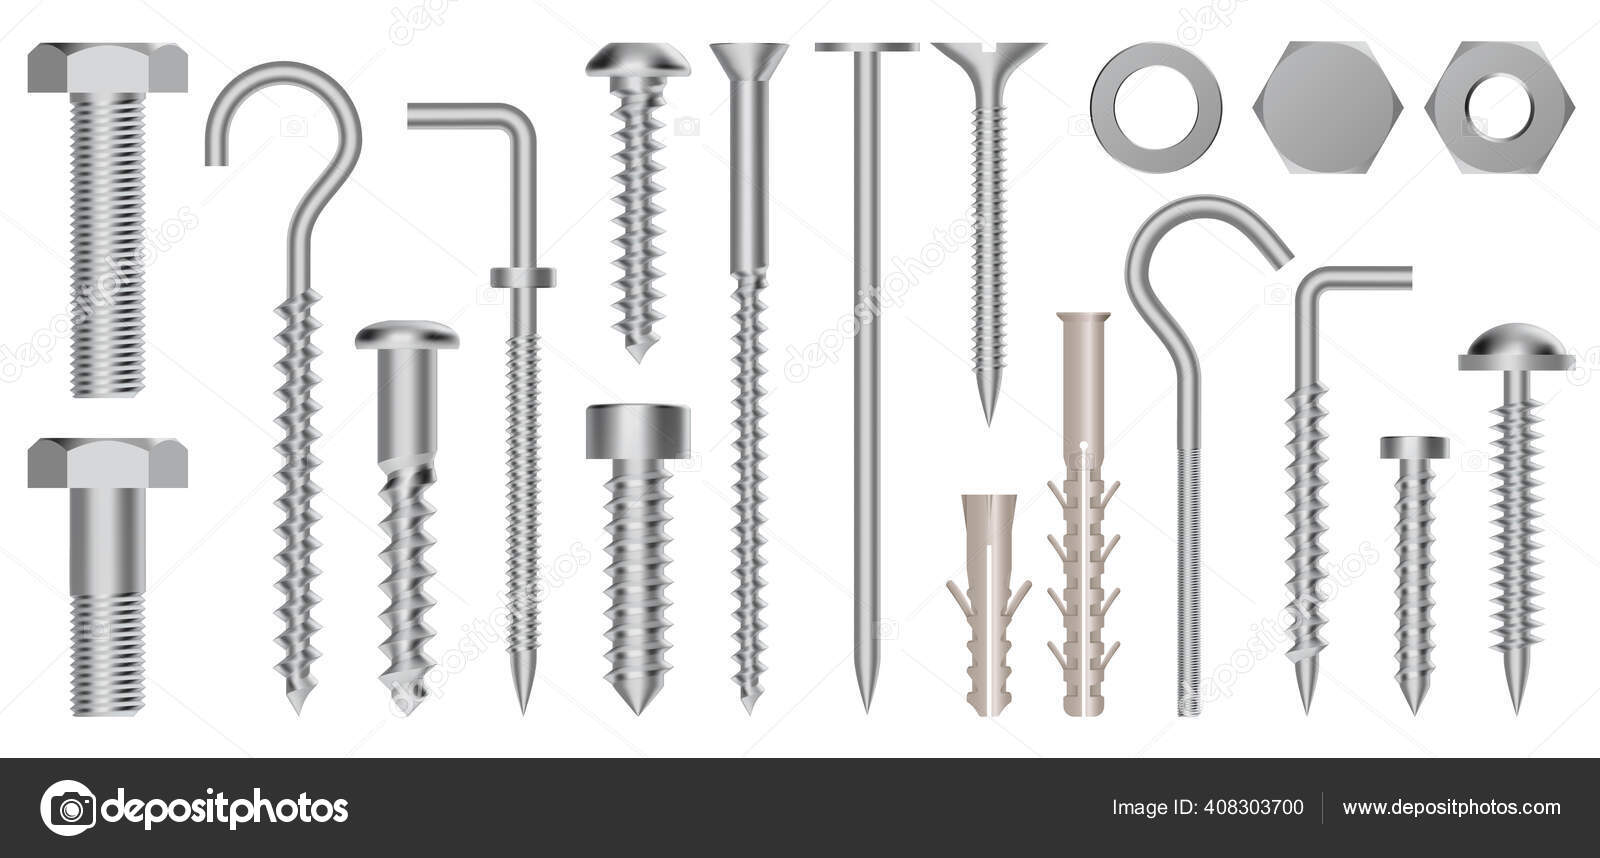 Realistic 3d screws and bolts. Hardware stainless screws, bolts